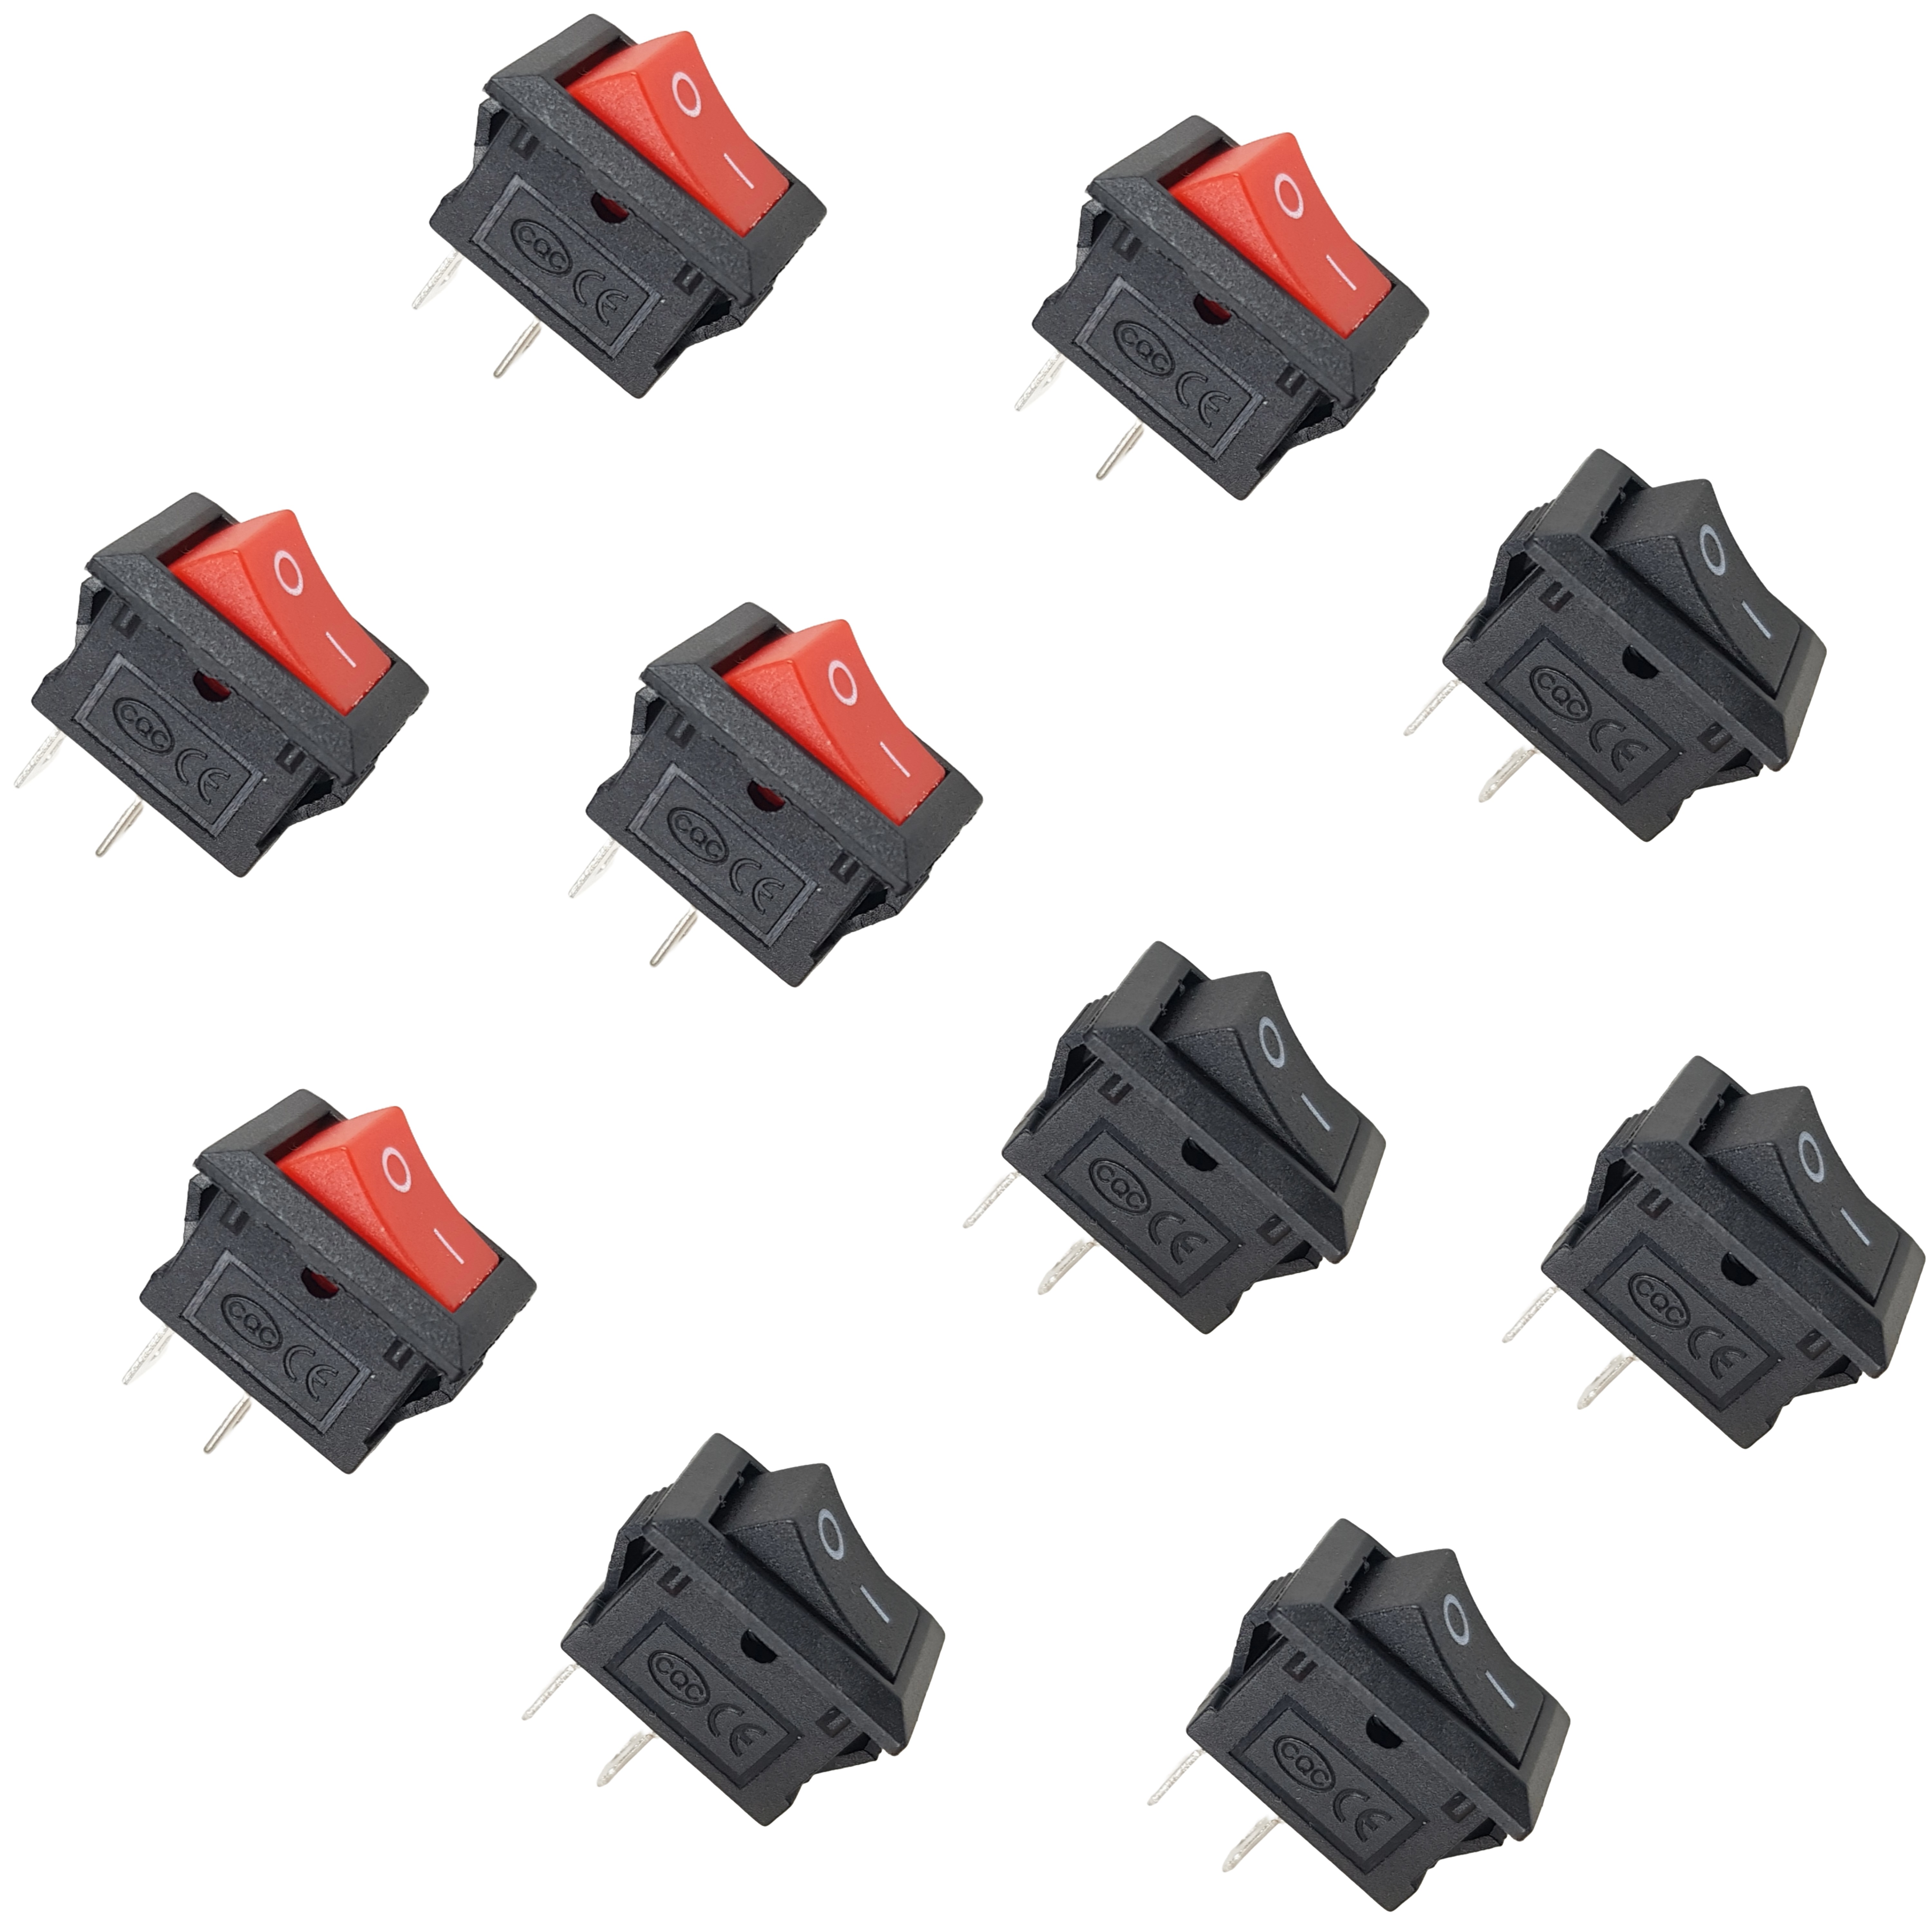 ON/OFF Rectangle Rocker Switch for Arduino, ESP32, ESP8266, Raspberry Pi, Black and Red